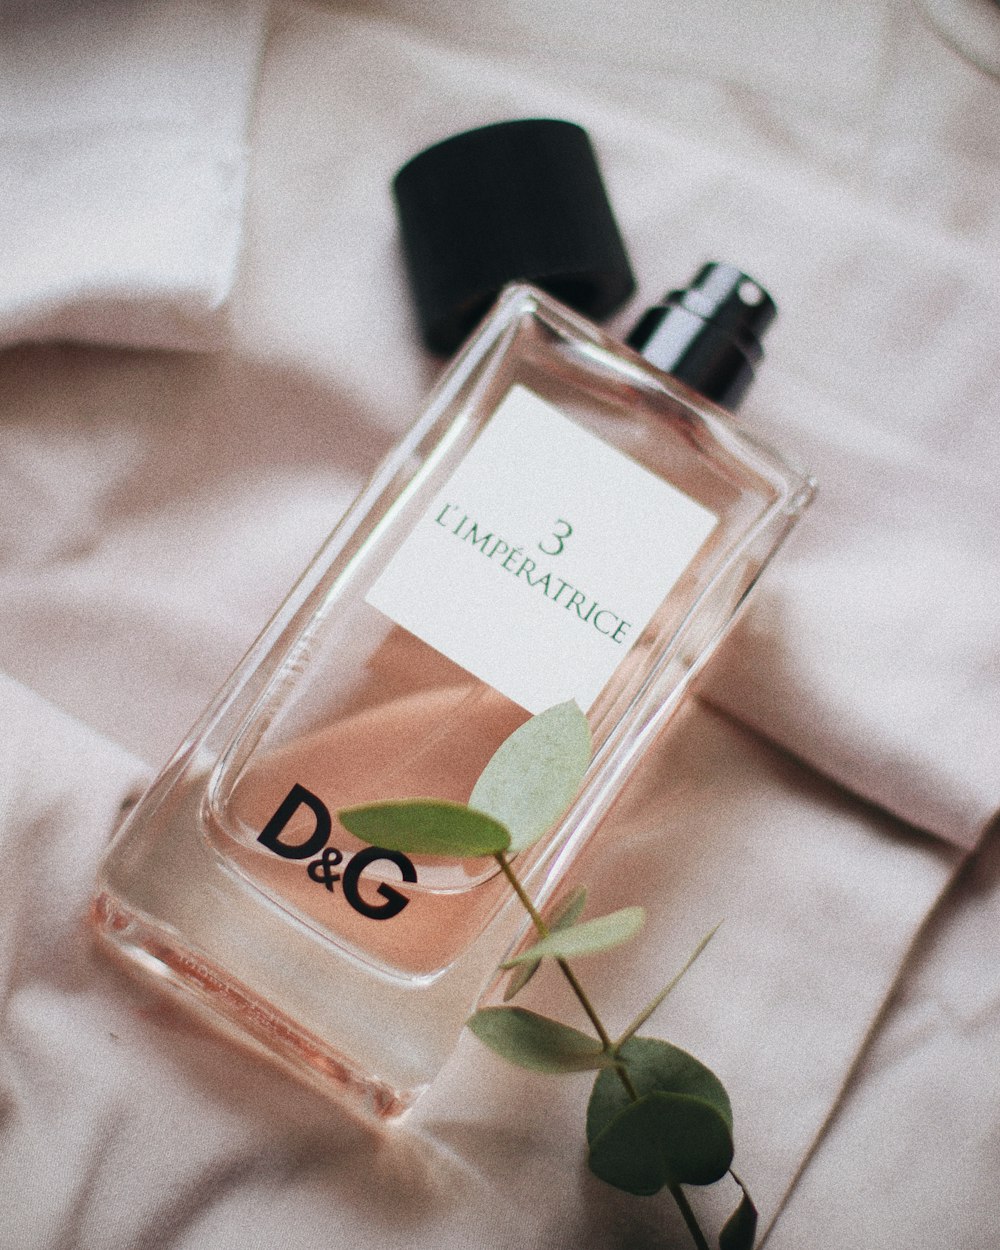 a bottle of d & g perfume next to a plant